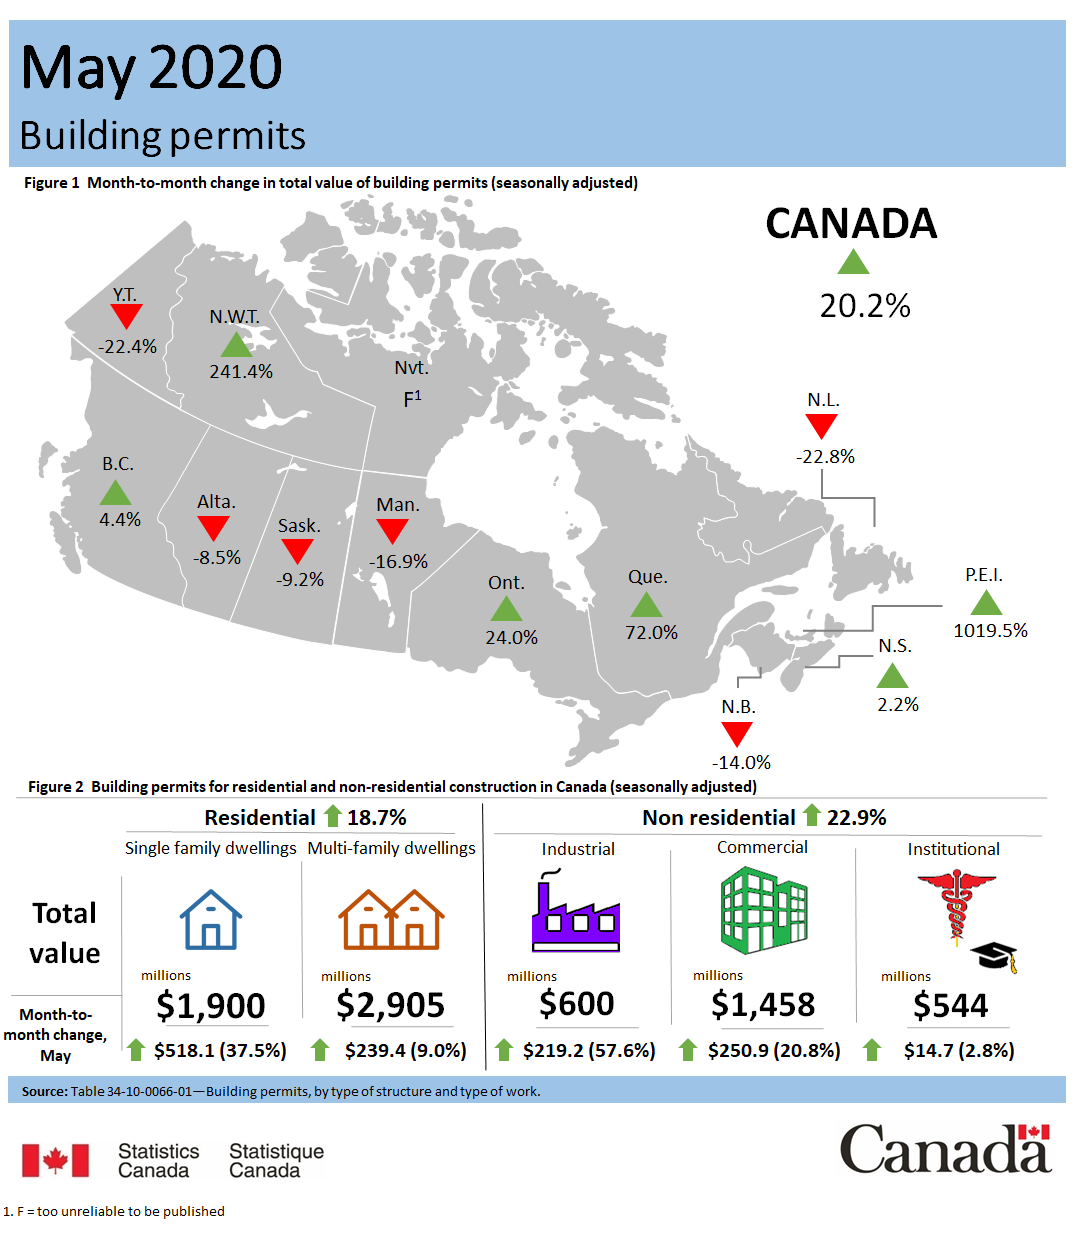 Thumbnail for Infographic 1: Building permits, May 2020